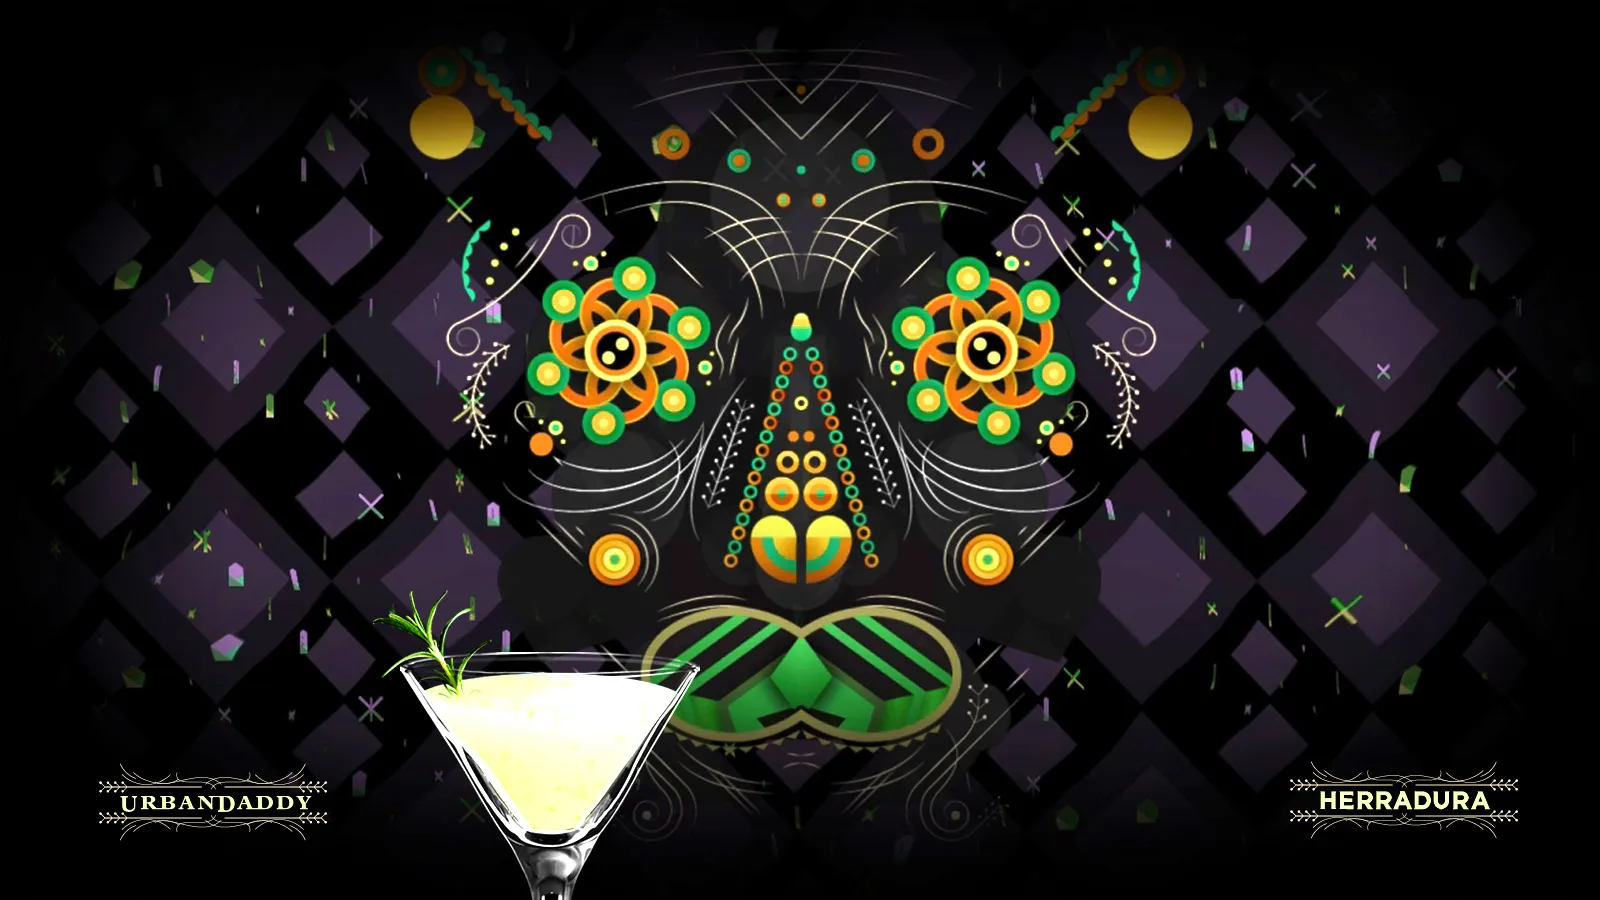 Mixology - generative art was created while the mixologists crafted the cocktails